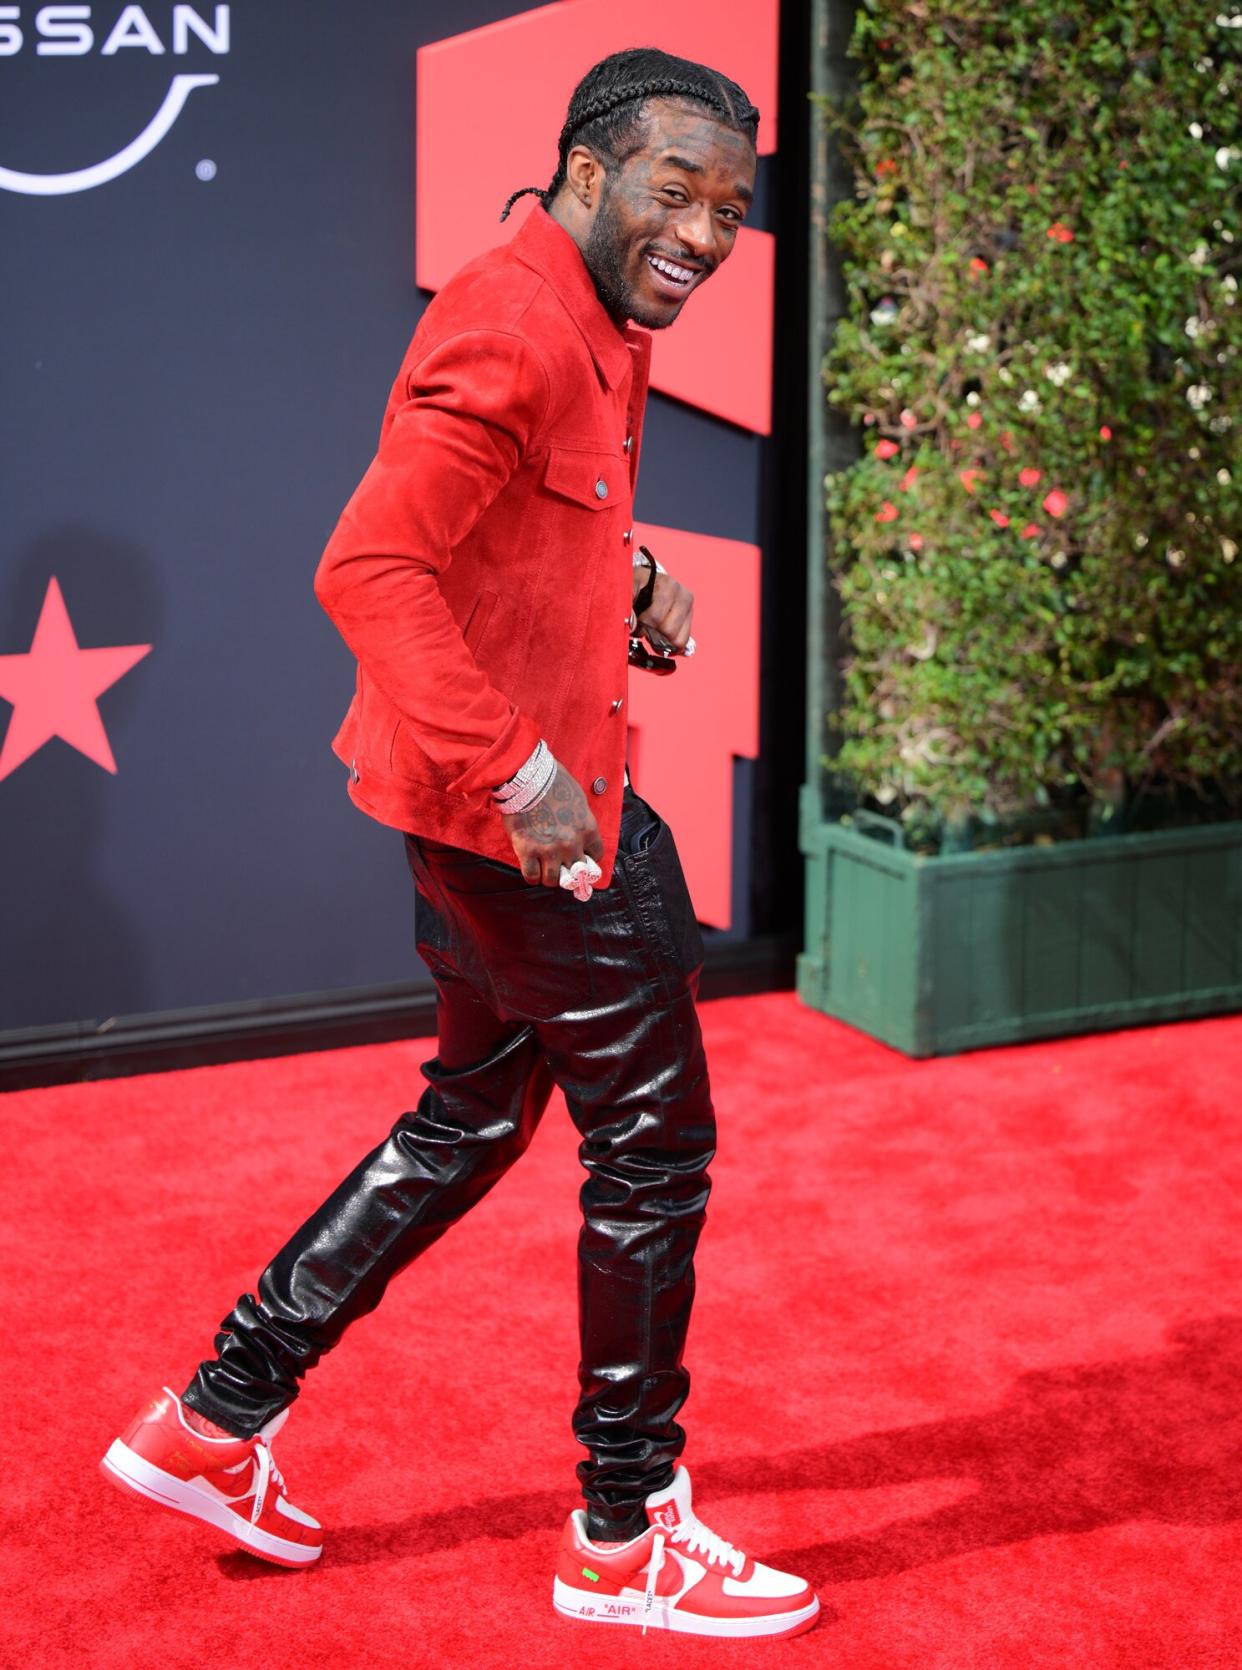 Lil Uzi Vert attends the 2022 BET Awards at Microsoft Theater on June 26, 2022 in Los Angeles, California.